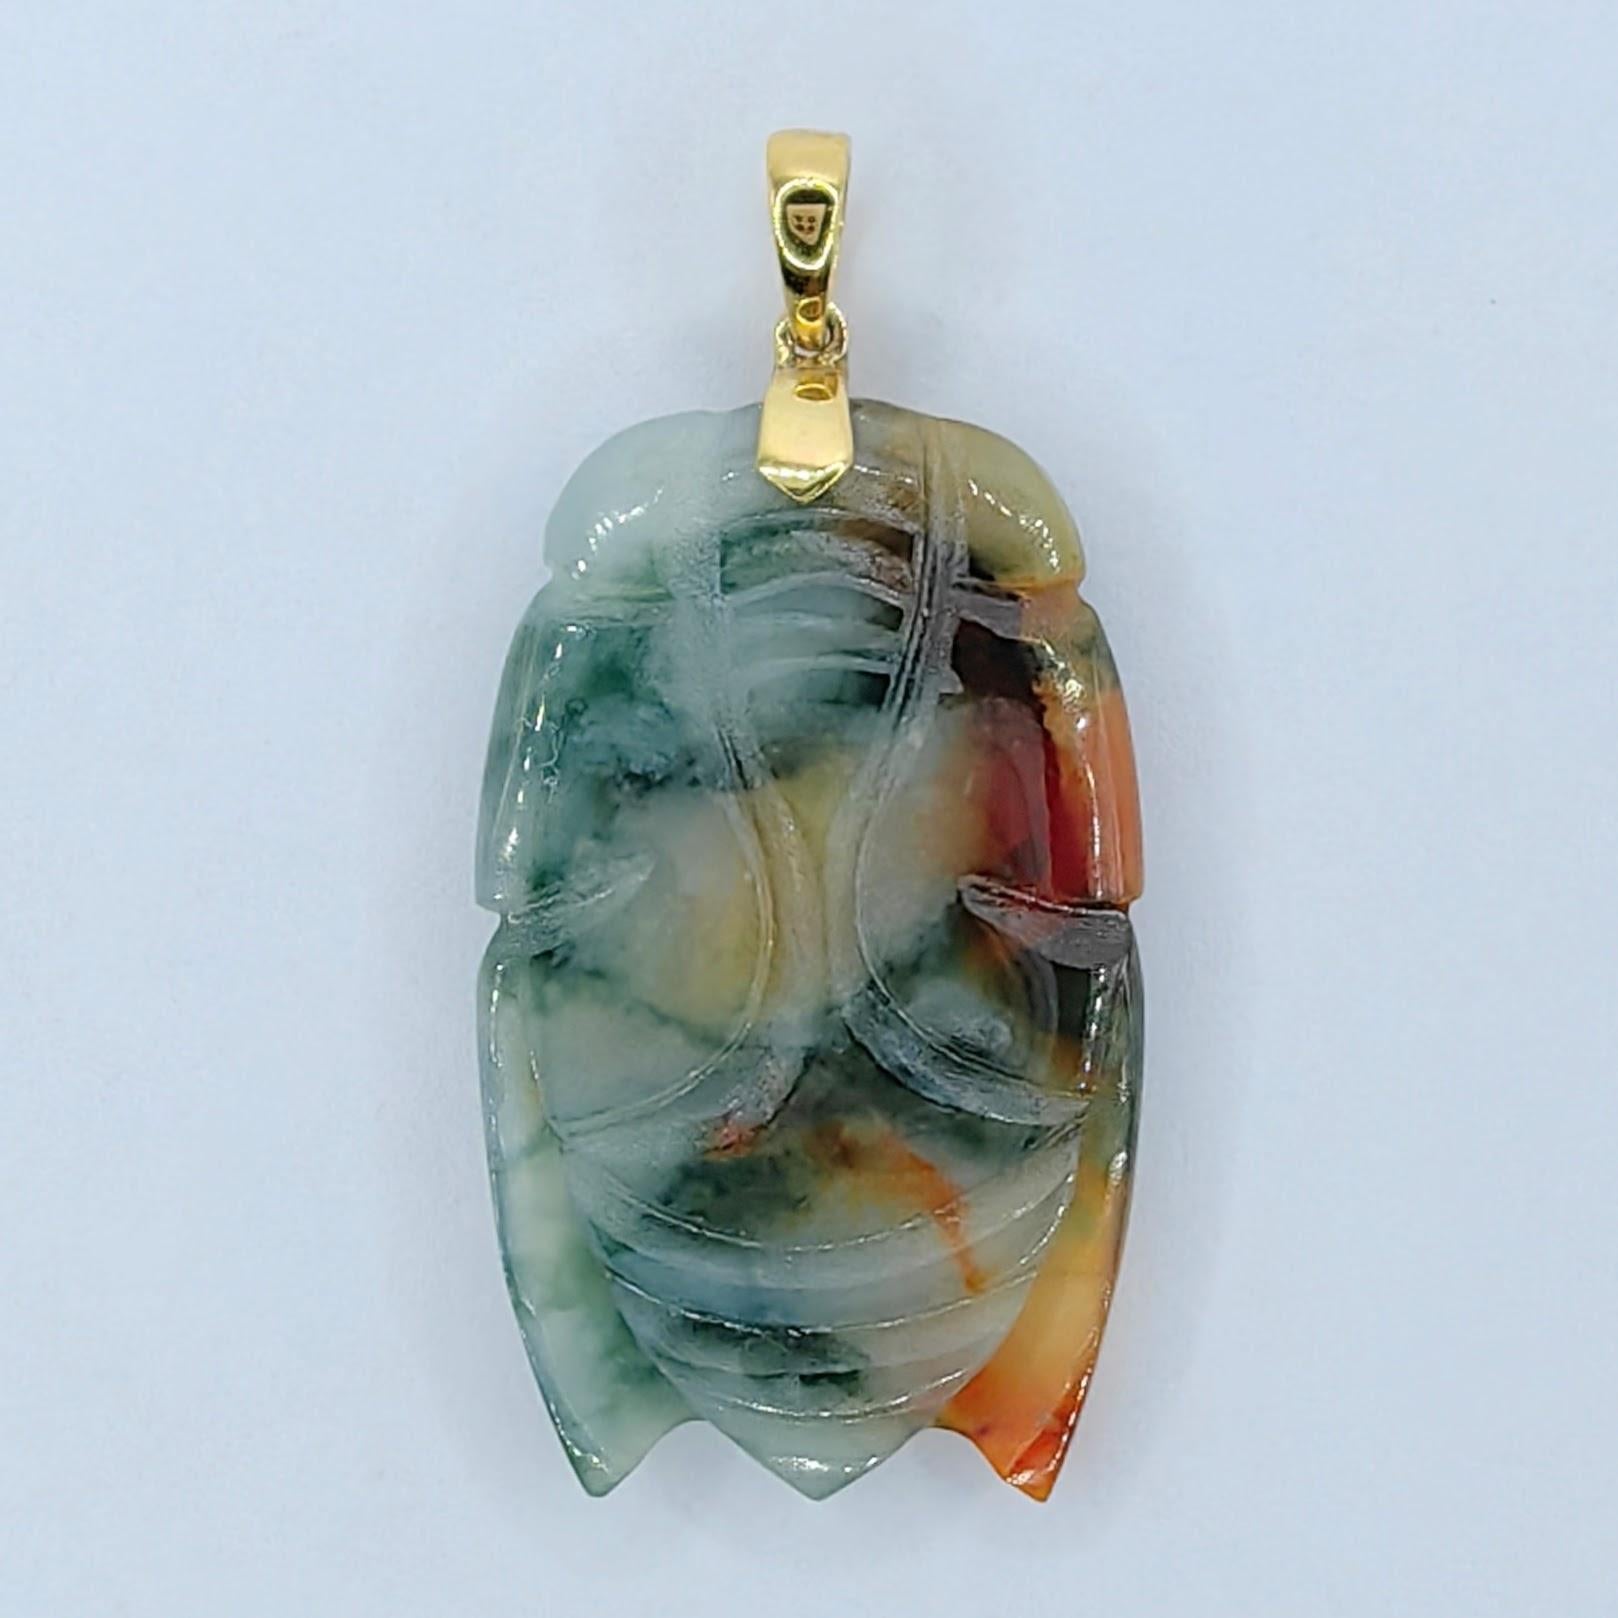 Introducing our Green Orange White Tricolor Jadeite Jade Cicada Pendant in 18K Yellow Gold, a mesmerizing piece that harmoniously combines the natural beauty of tricolor jadeite jade with the luxurious warmth of 18K yellow gold.

At the heart of